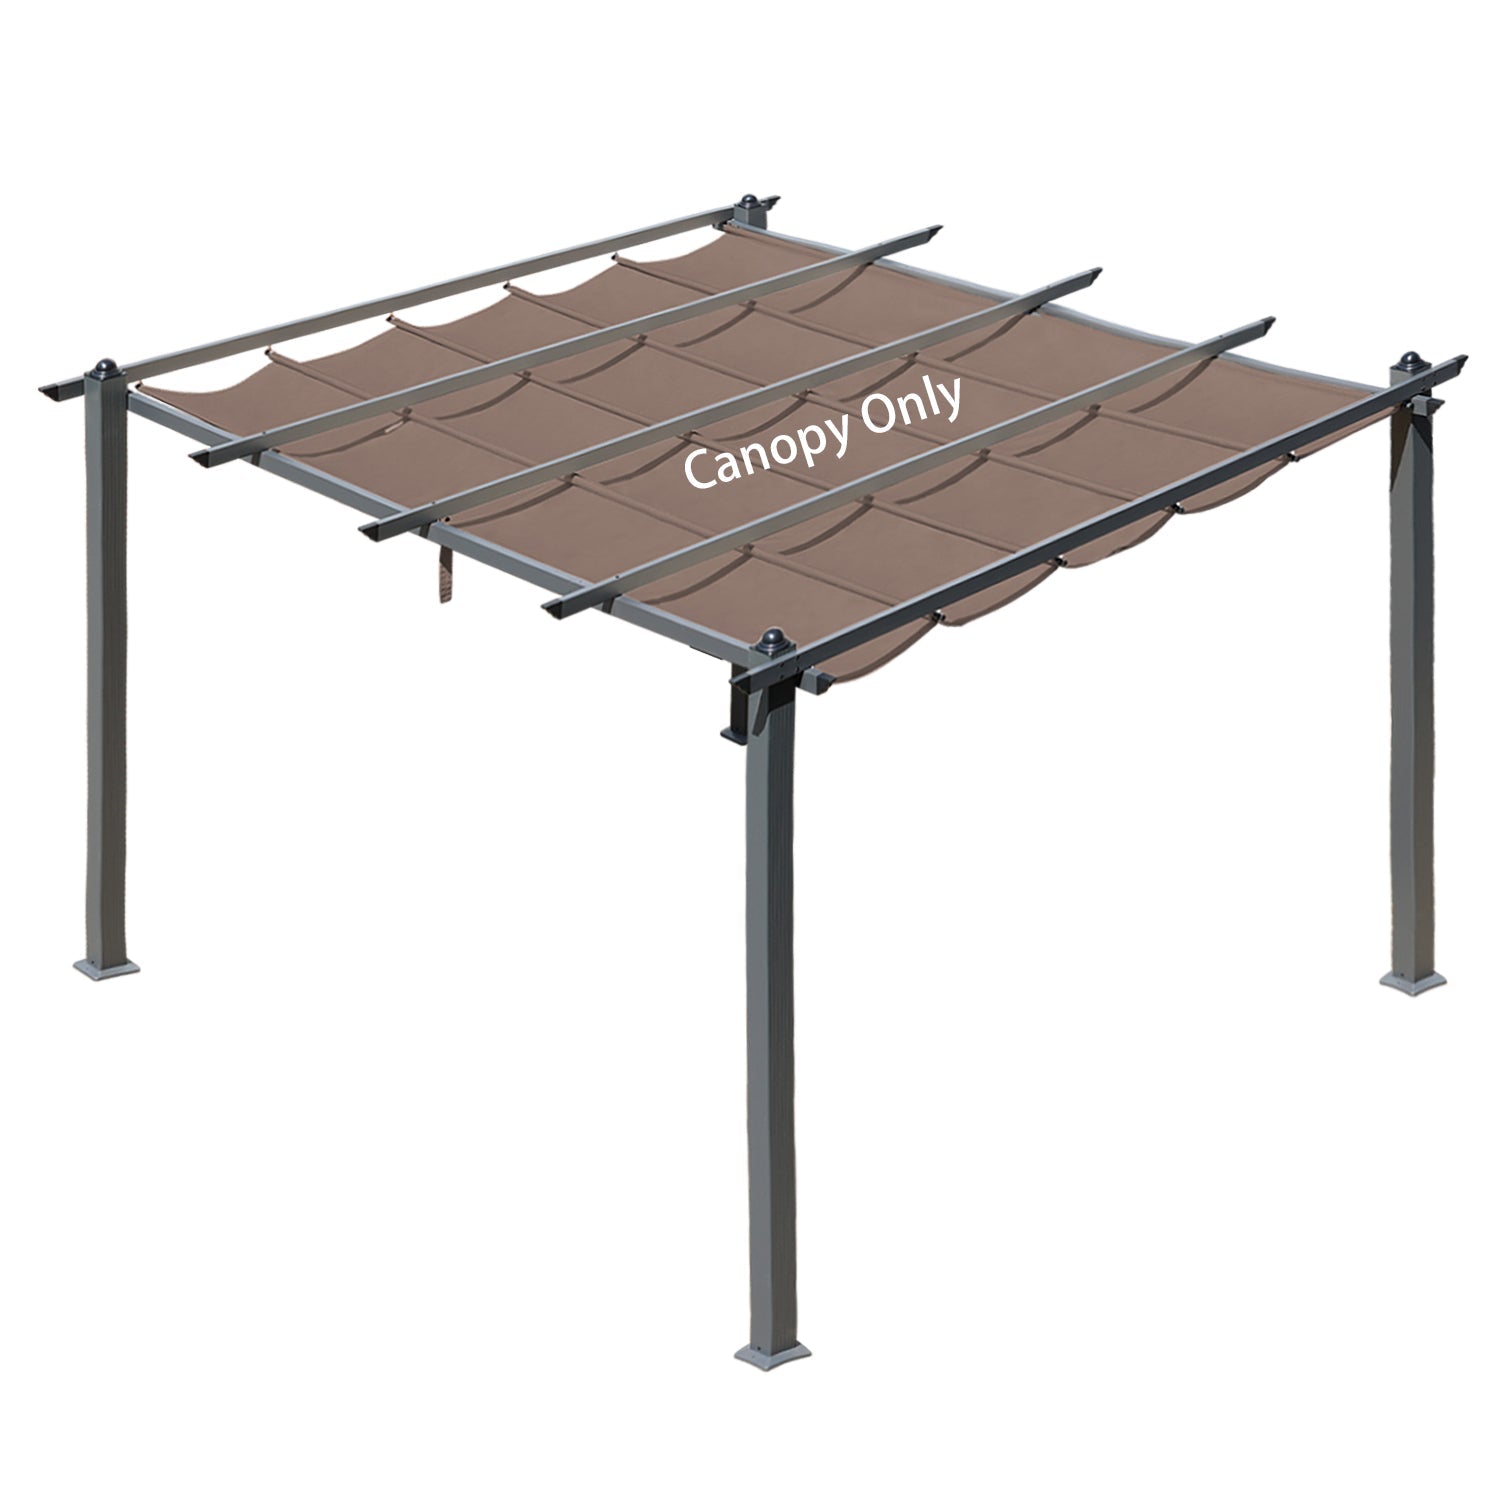 Replacement Pergola Canopy - Retractable Shade in Dark Brown Fabric for 10 x 10 ft /10 x 13 ftPergola, UV Resistant, Fade-Resistant, Water-Repellent, Adjustable and Durable Fabric - Aoodor